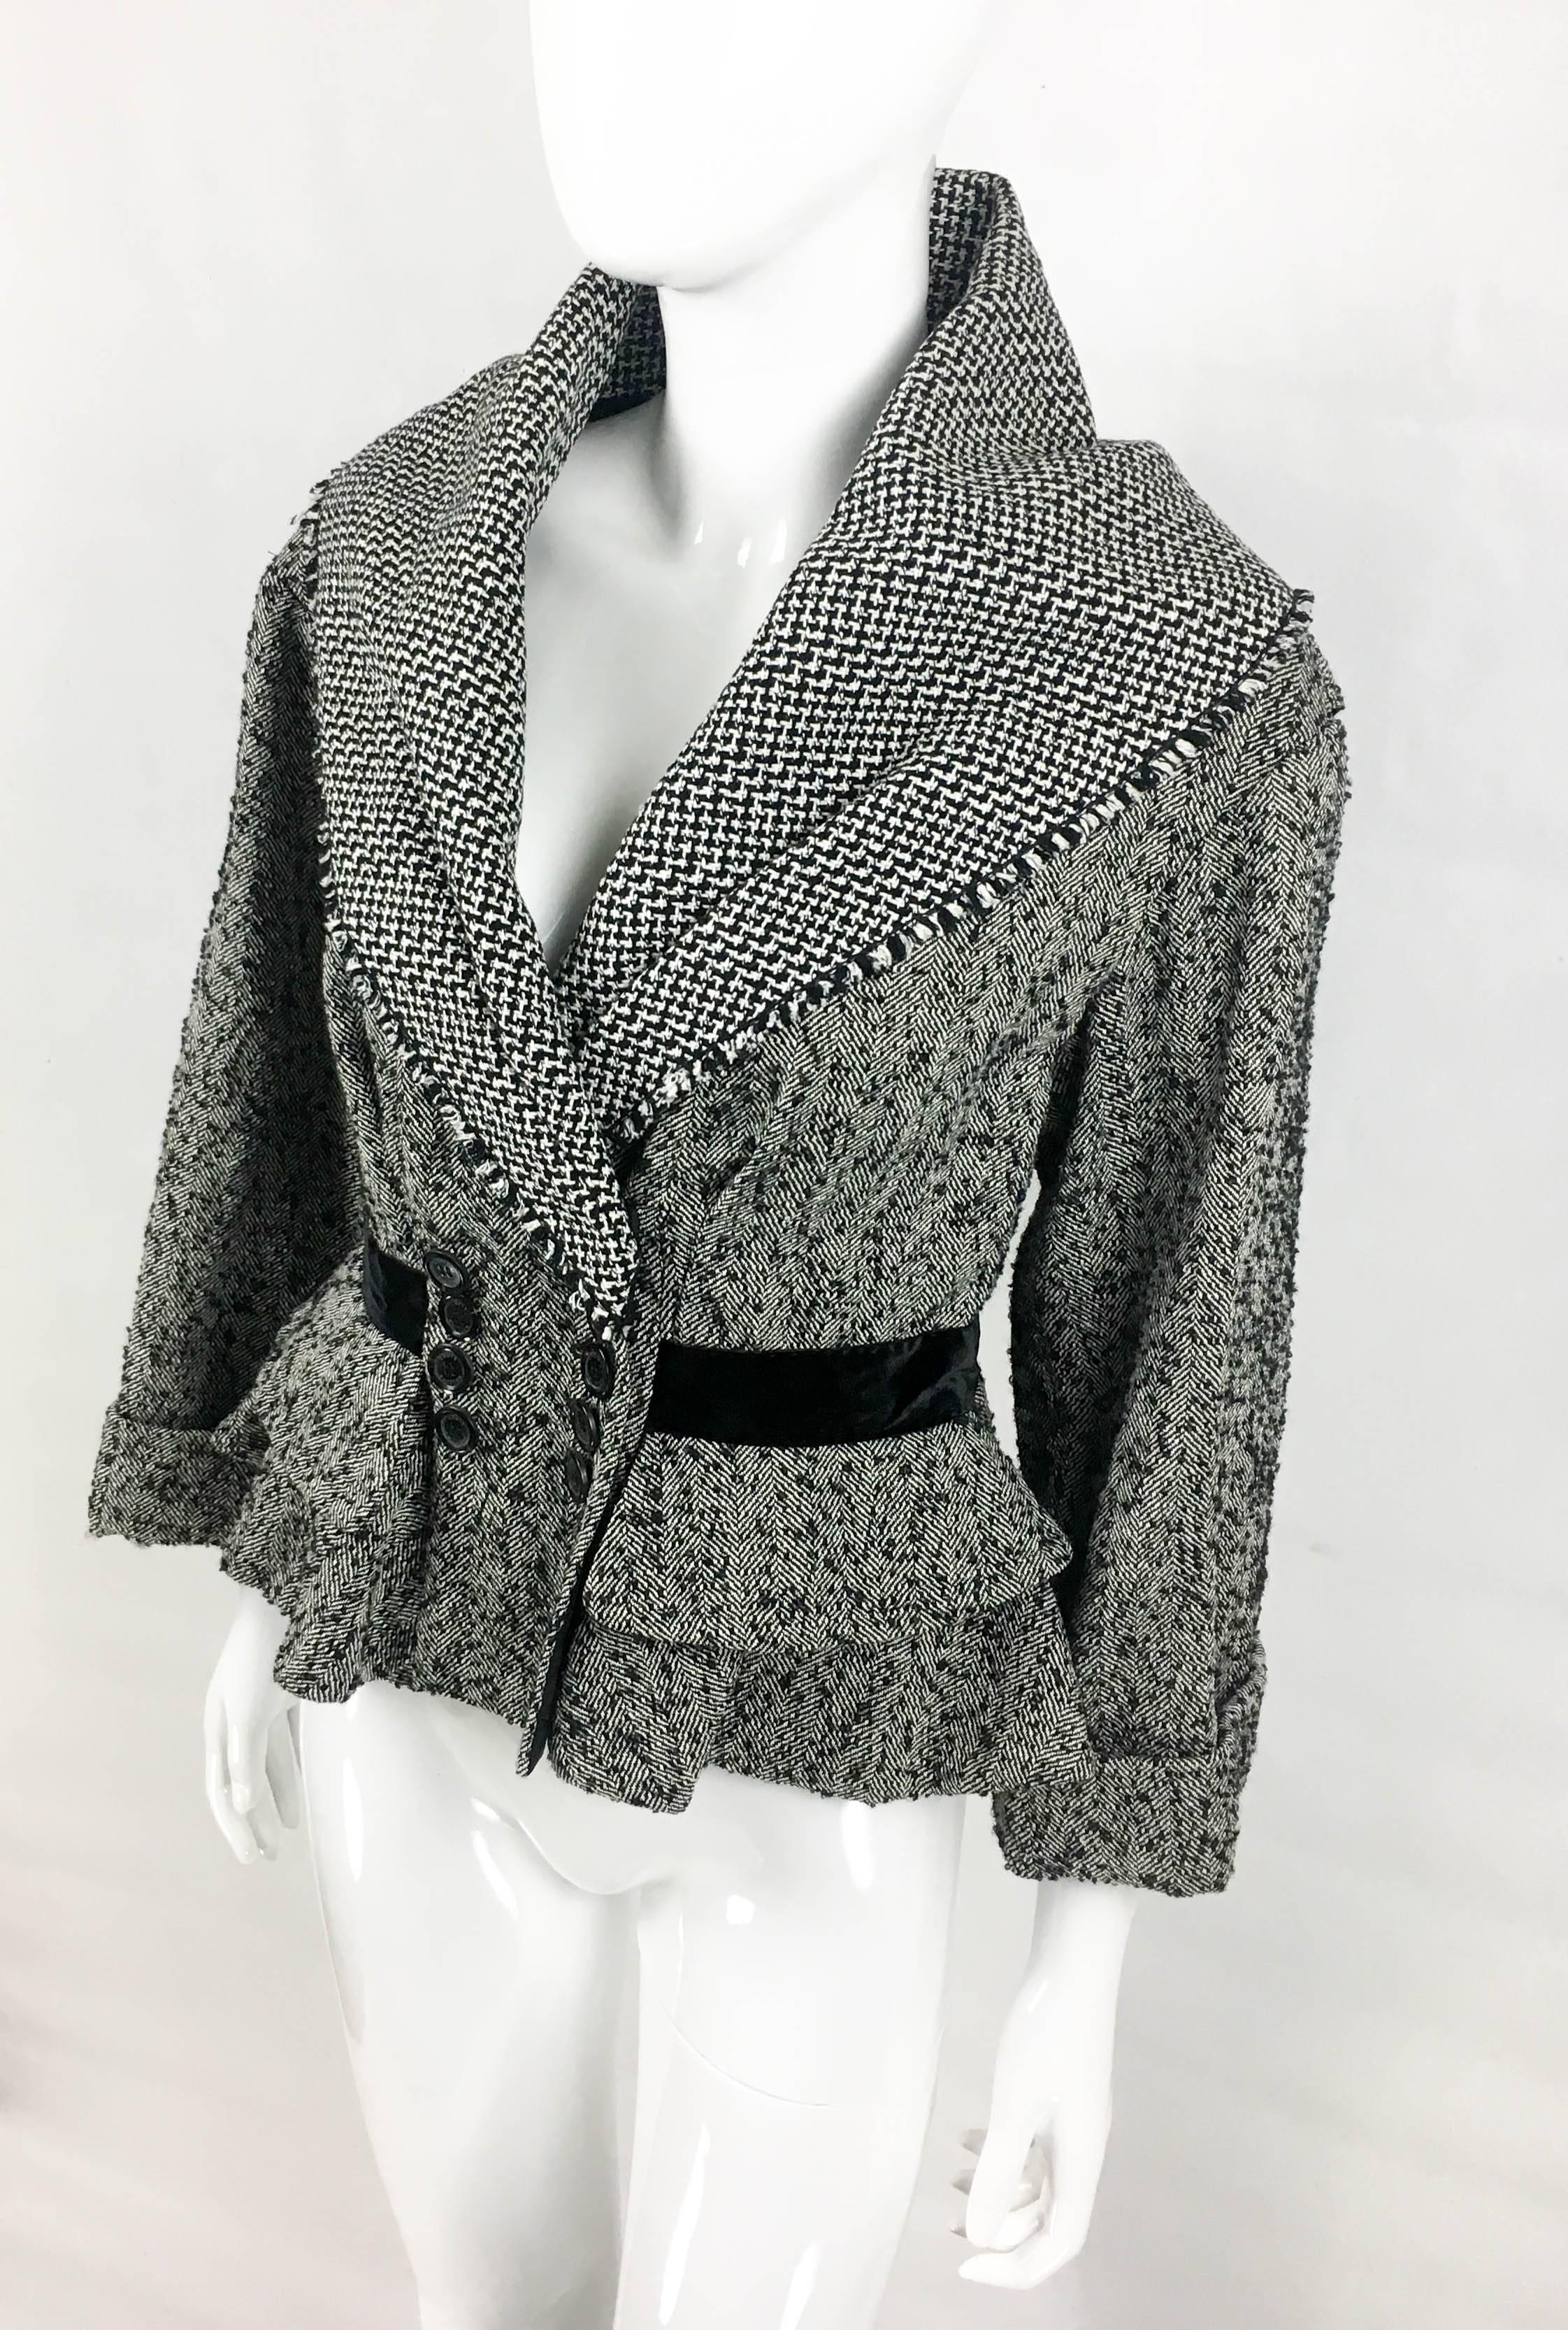 Louis Vuitton Black and White Tweed Jacket With Dramatic Collar - 21st Century 2